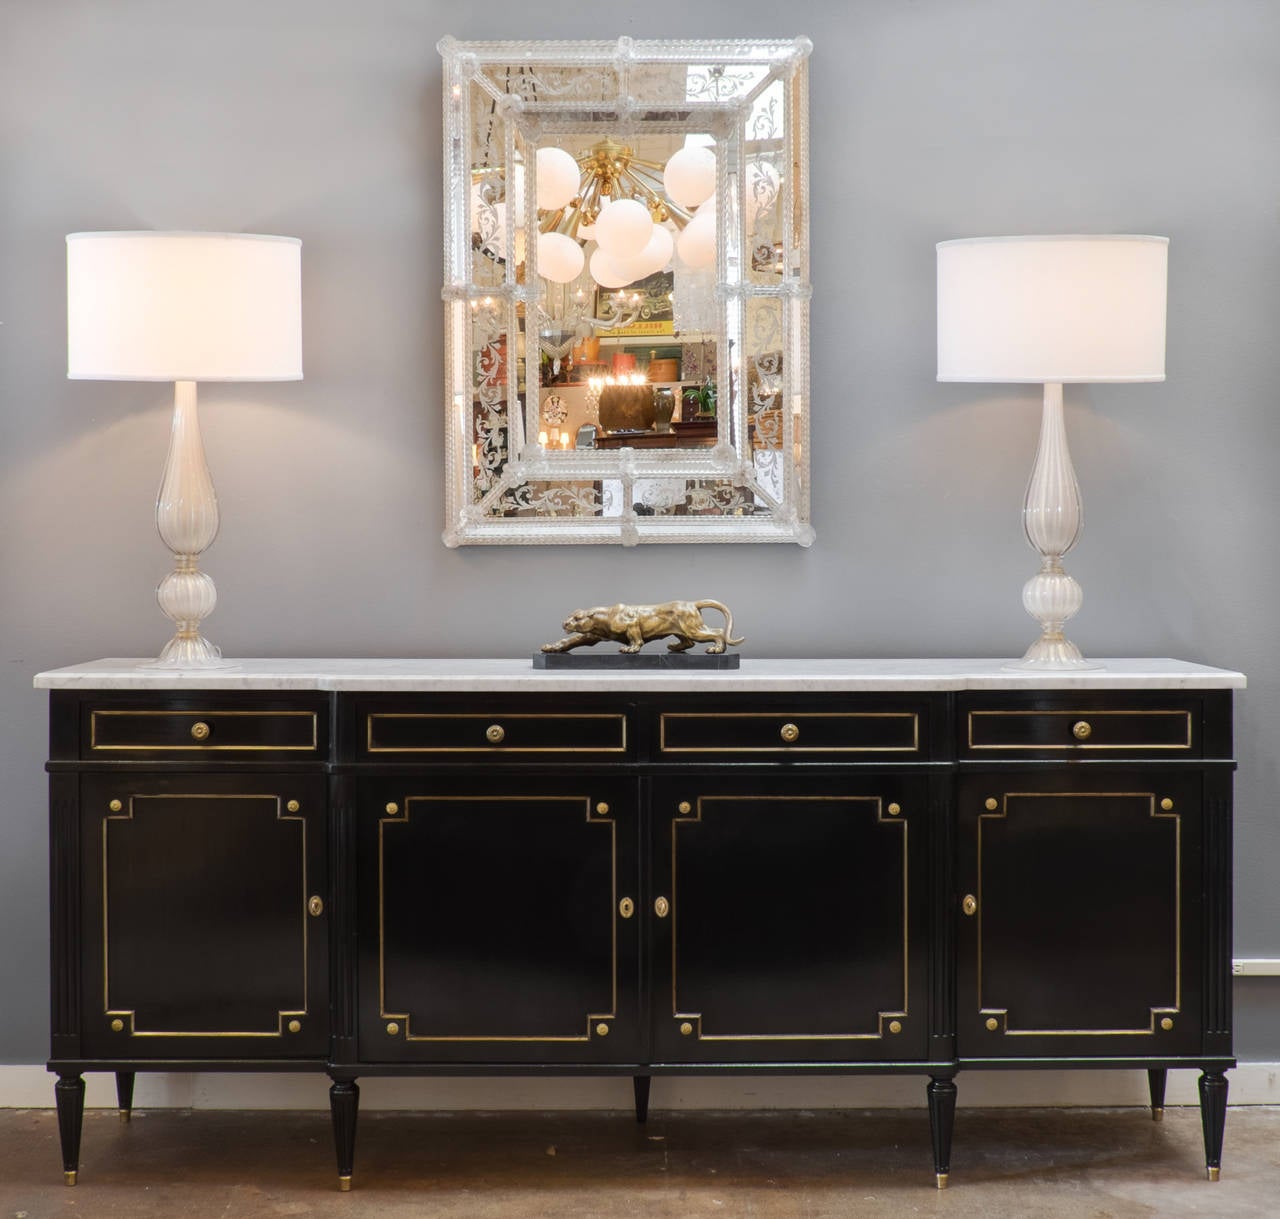 Antique French Louis XVI style buffet in ebonized mahogany with a lustrous French polish finish, oak as a secondary wood, original intact Carrara marble top. This piece is of the same quality and design of identical 